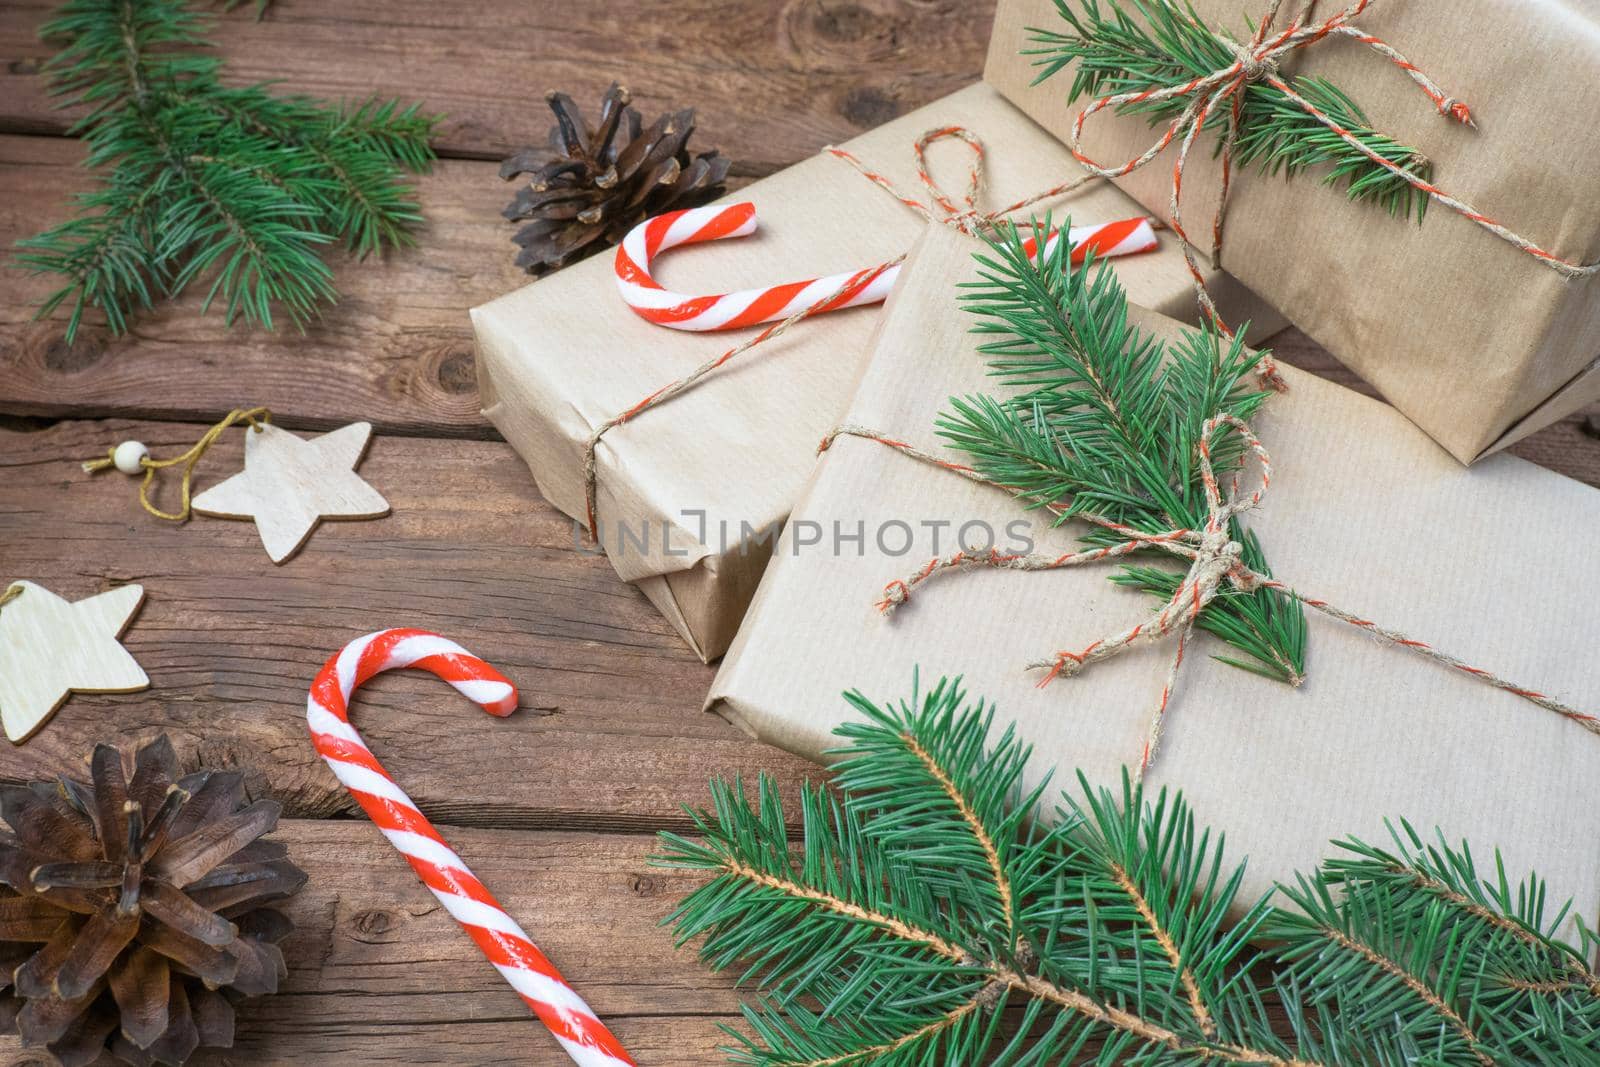 Christmas gifts or gift box wrapped in kraft paper with decorations, pine cones and fir branches on a rustic wooden background